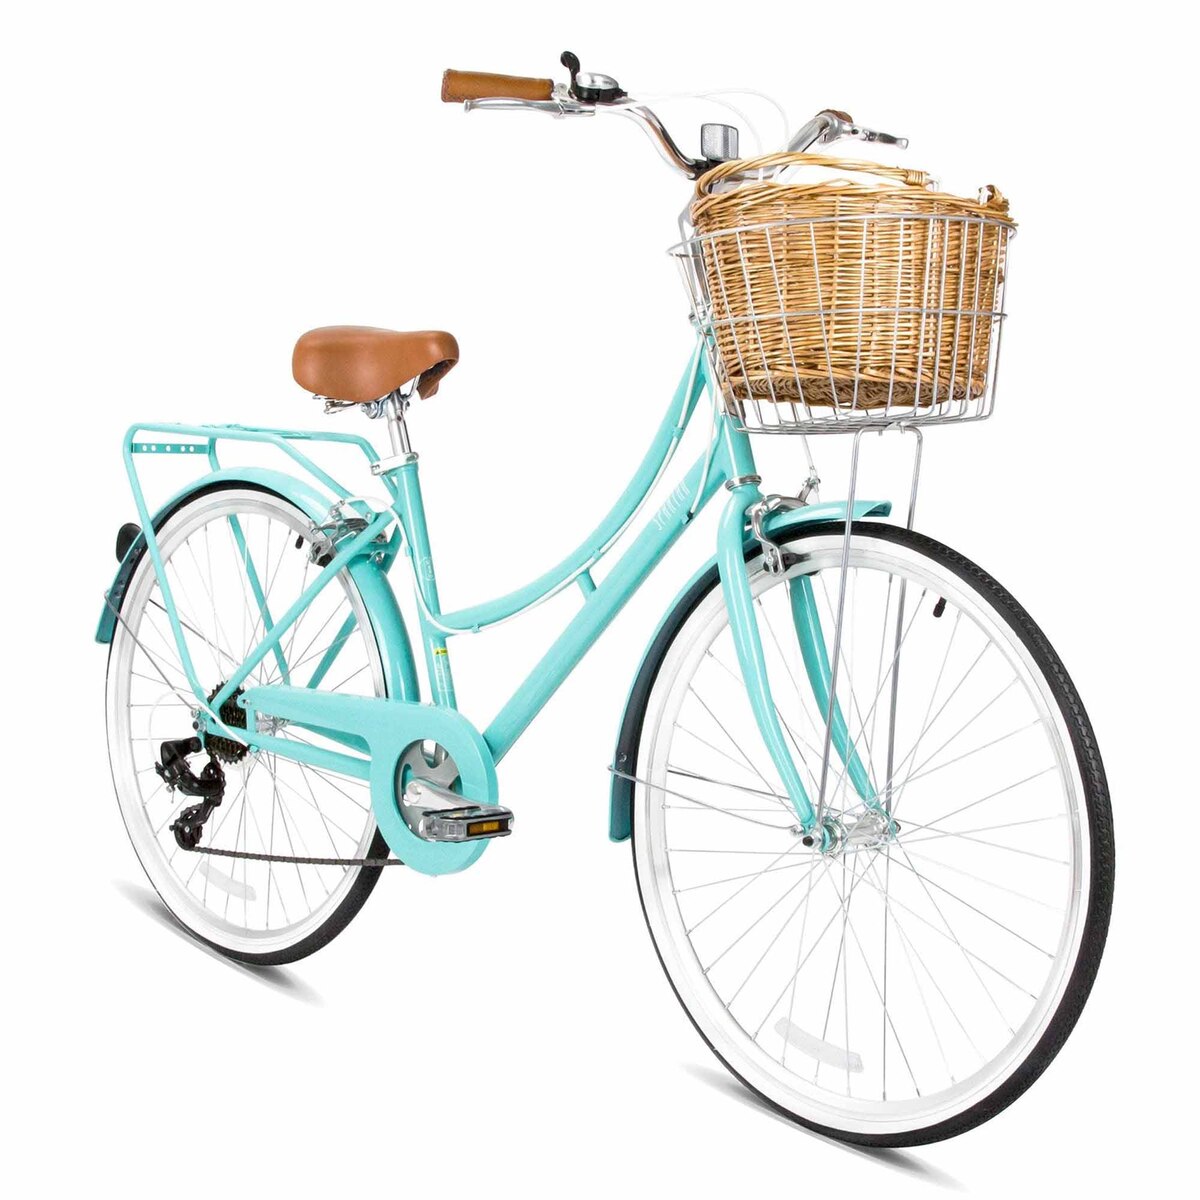 Spartan 26 inches Platinum Women's City Bicycle, Small, Mint, SP-3127-S